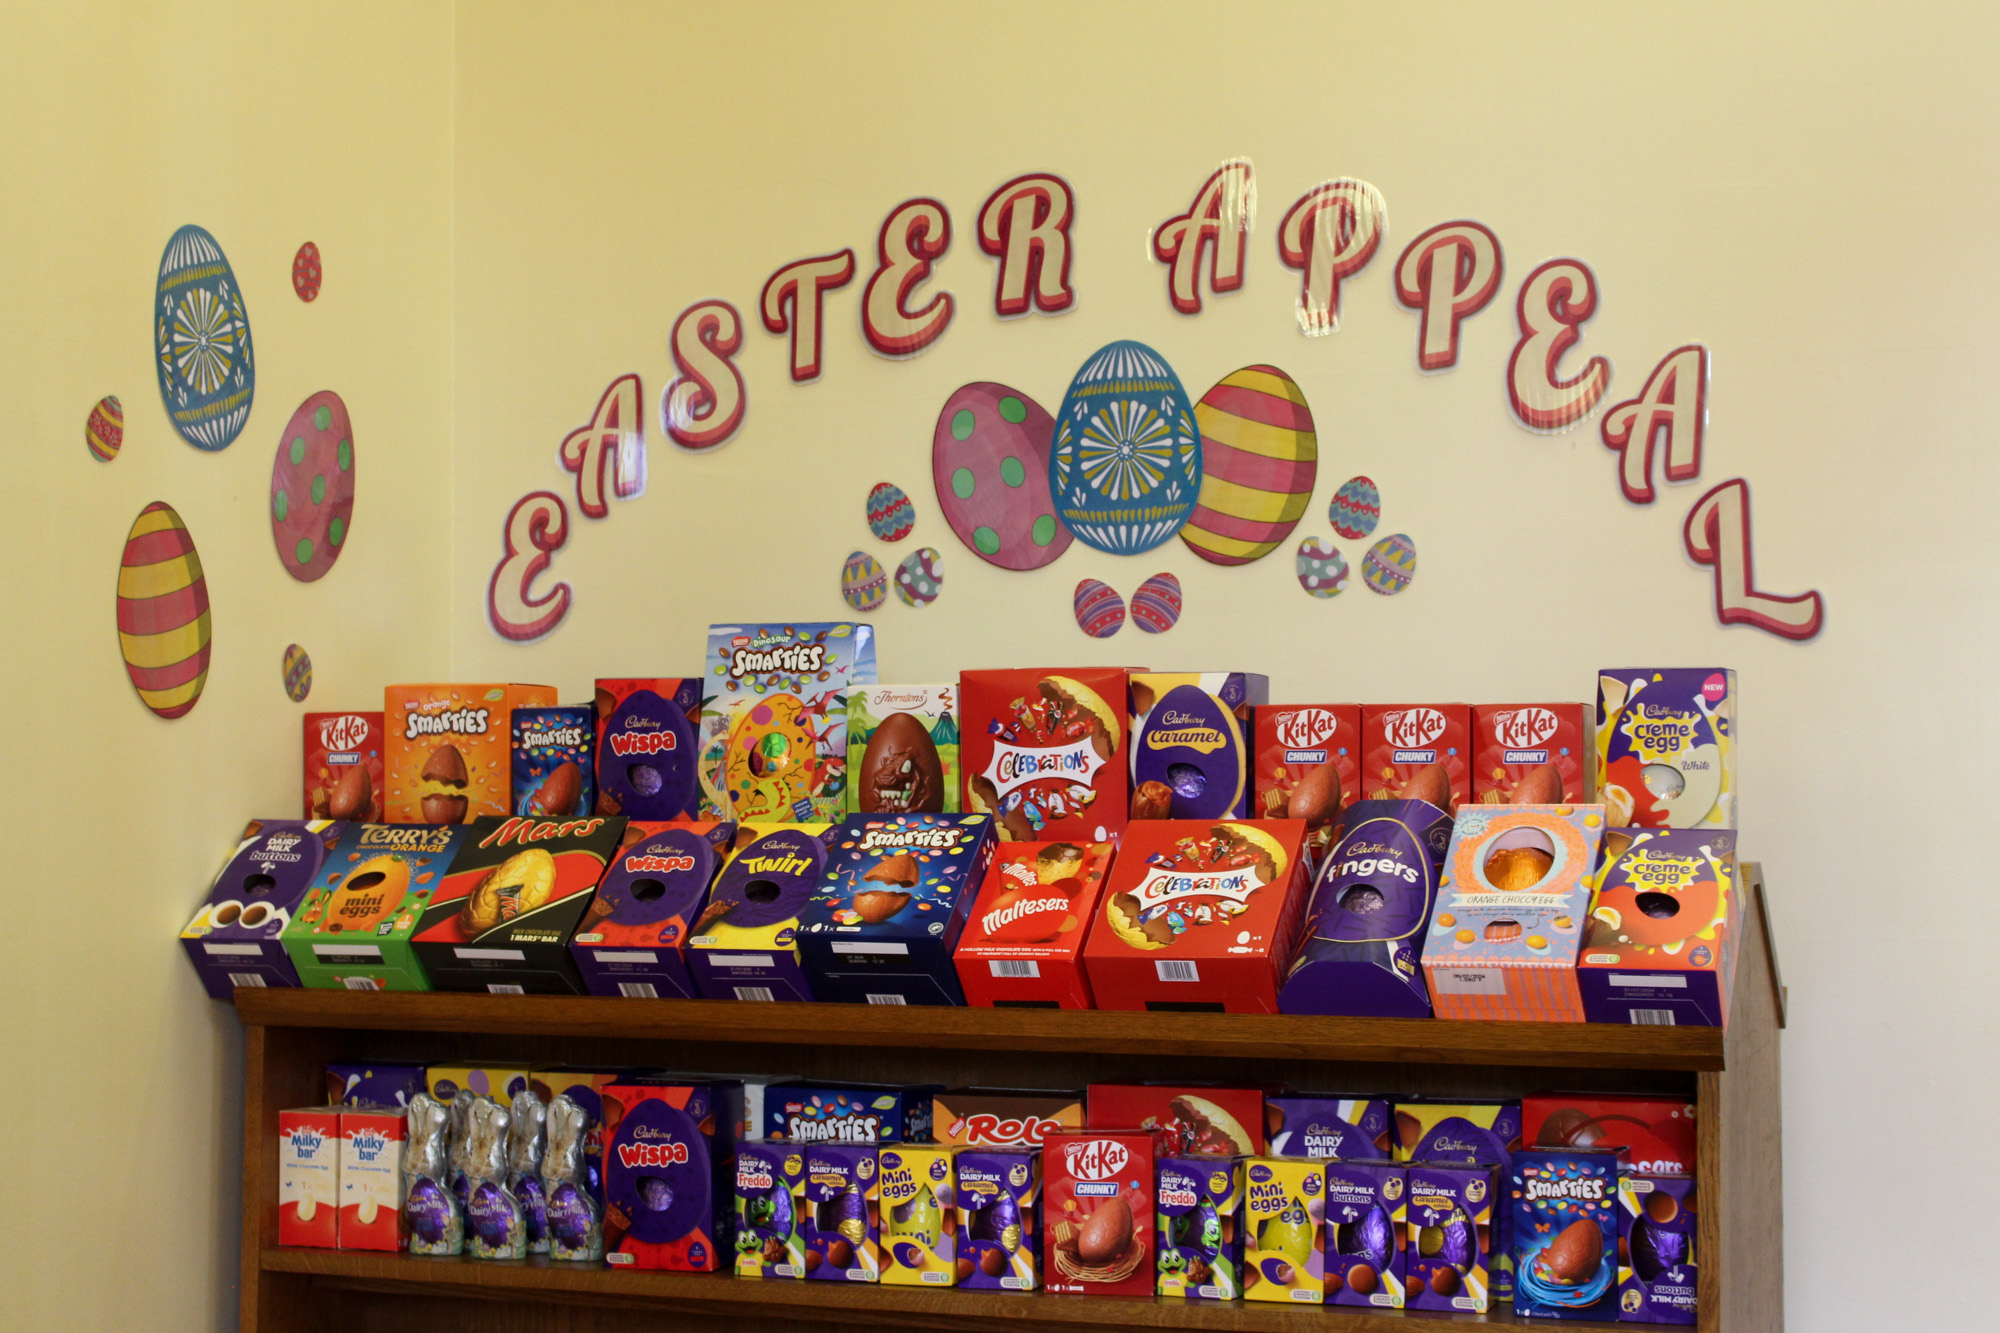 A set of shelves full to bursting with varied and colourful boxed Easter Eggs, above which the words 'Easter Appeal' have been stuck to the wall in an arch, with images of colourful eggs stuck under the words and to the side.